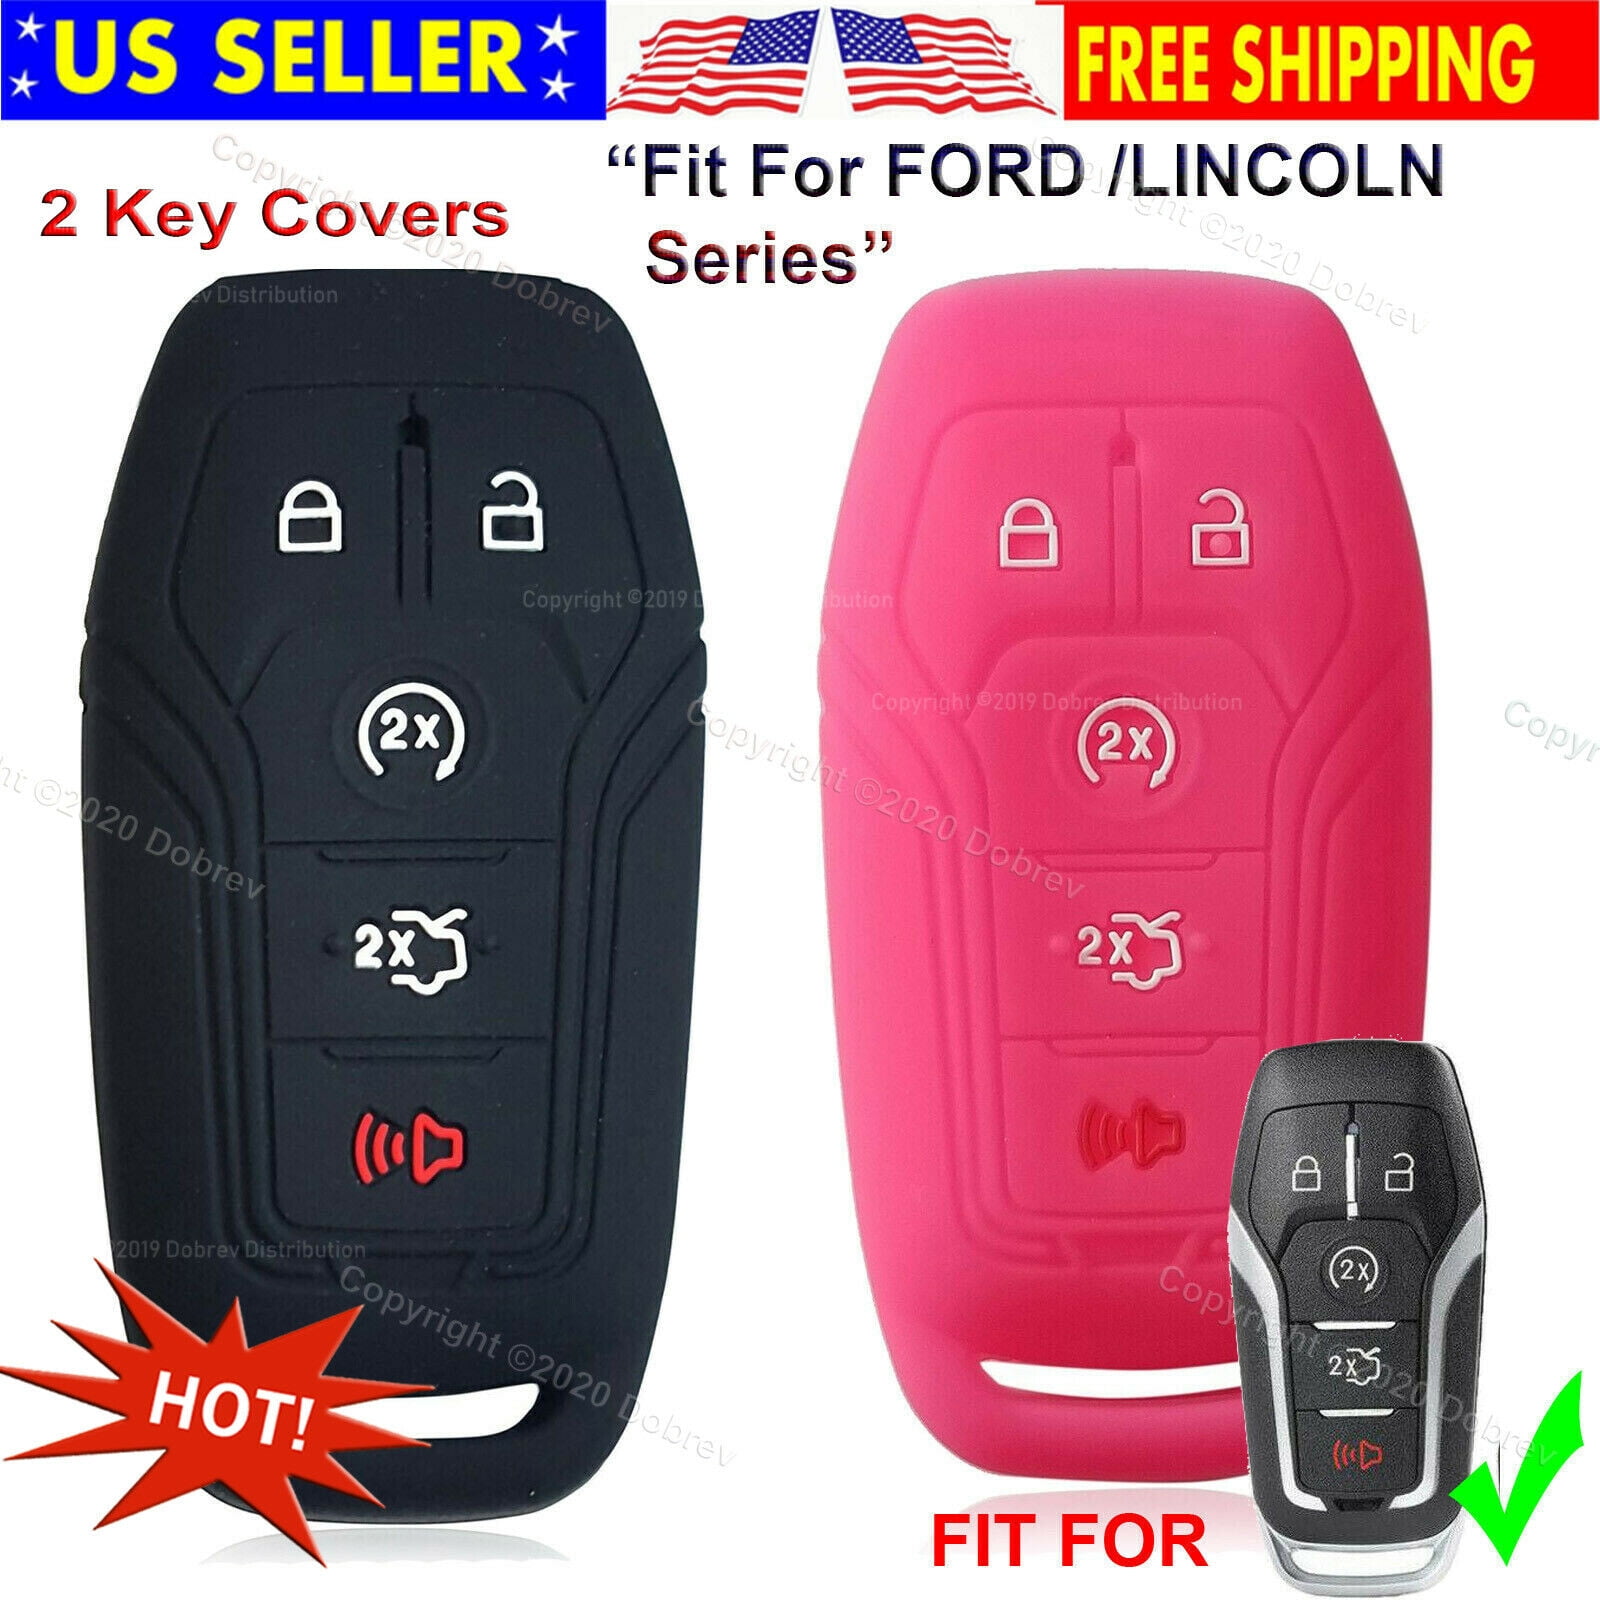 Alegender Qty 5 Buttons Rubber Smart Key Cover Jacket Glove Holder for Ford Fusion Explorer F-150 Mustang Lincoln MKZ MKC Fob Remote 2 